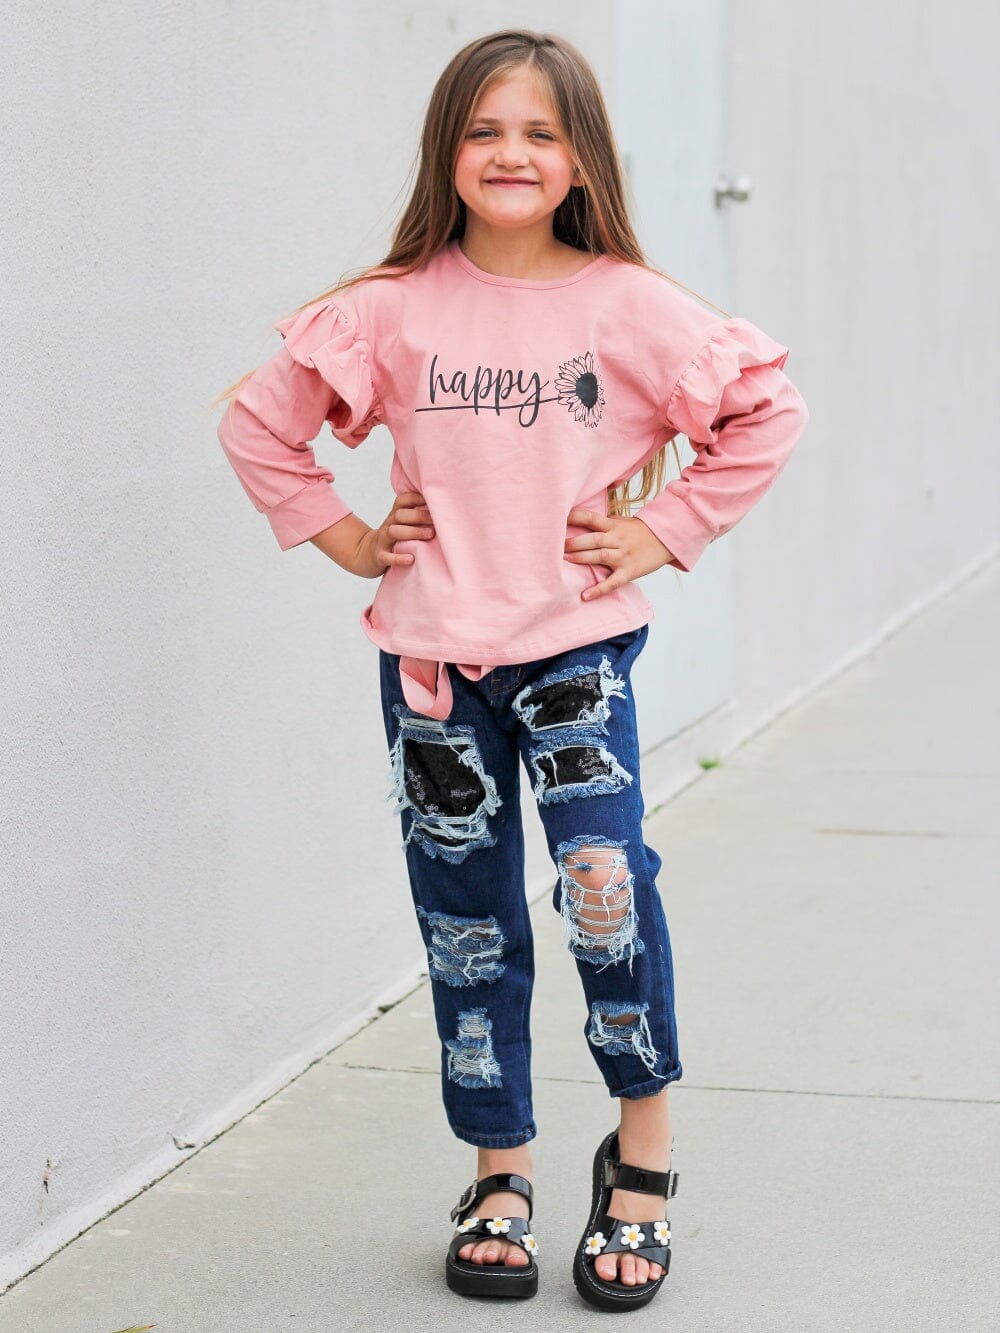 Girls Denim Styles, Outfits, Jeans, Shorts Sets, Jumpers, & More